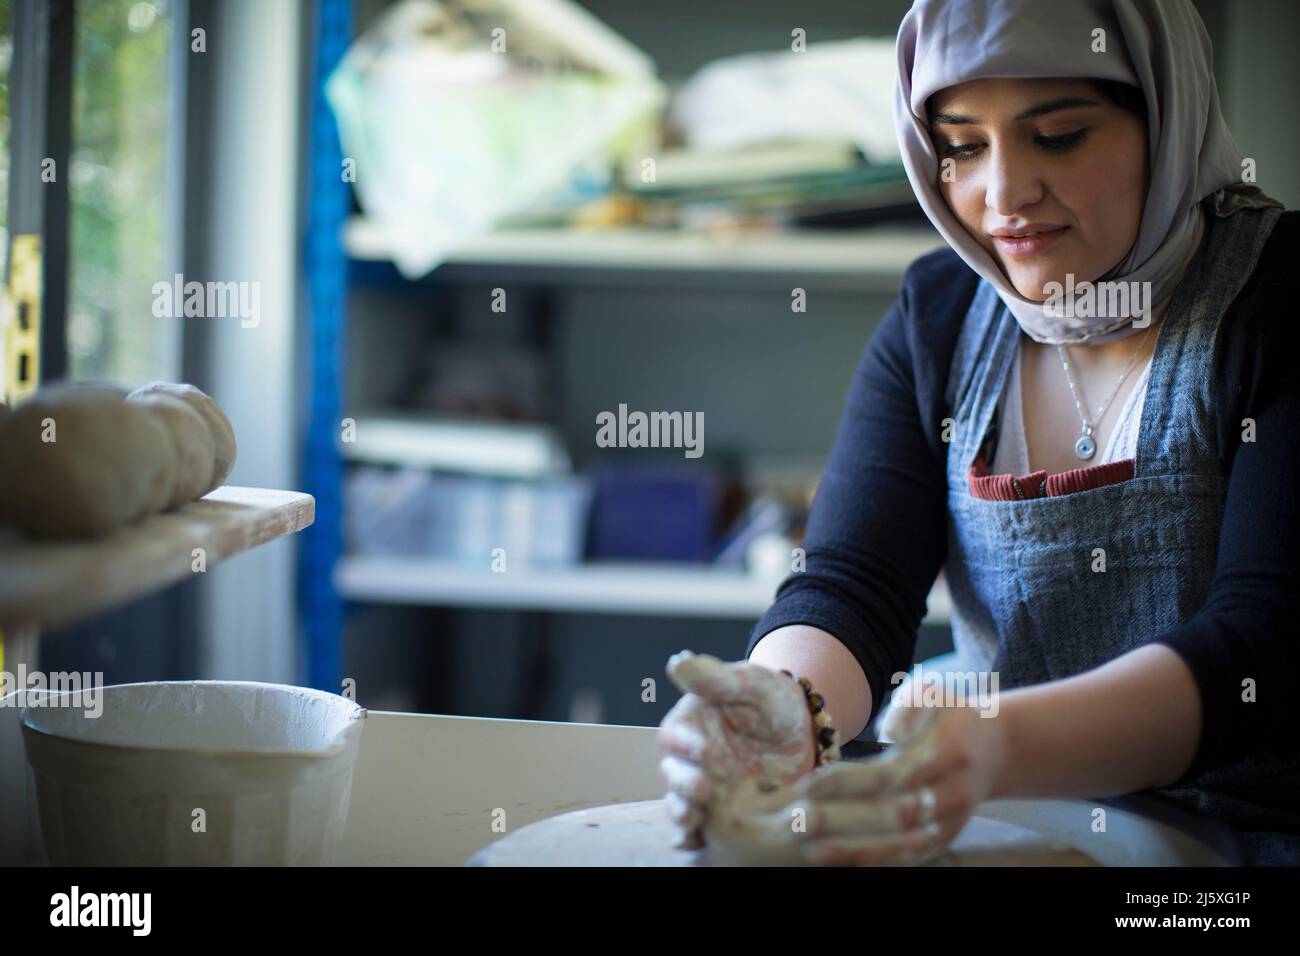 Young female Muslim artist at pottery wheel in art studio Stock Photo